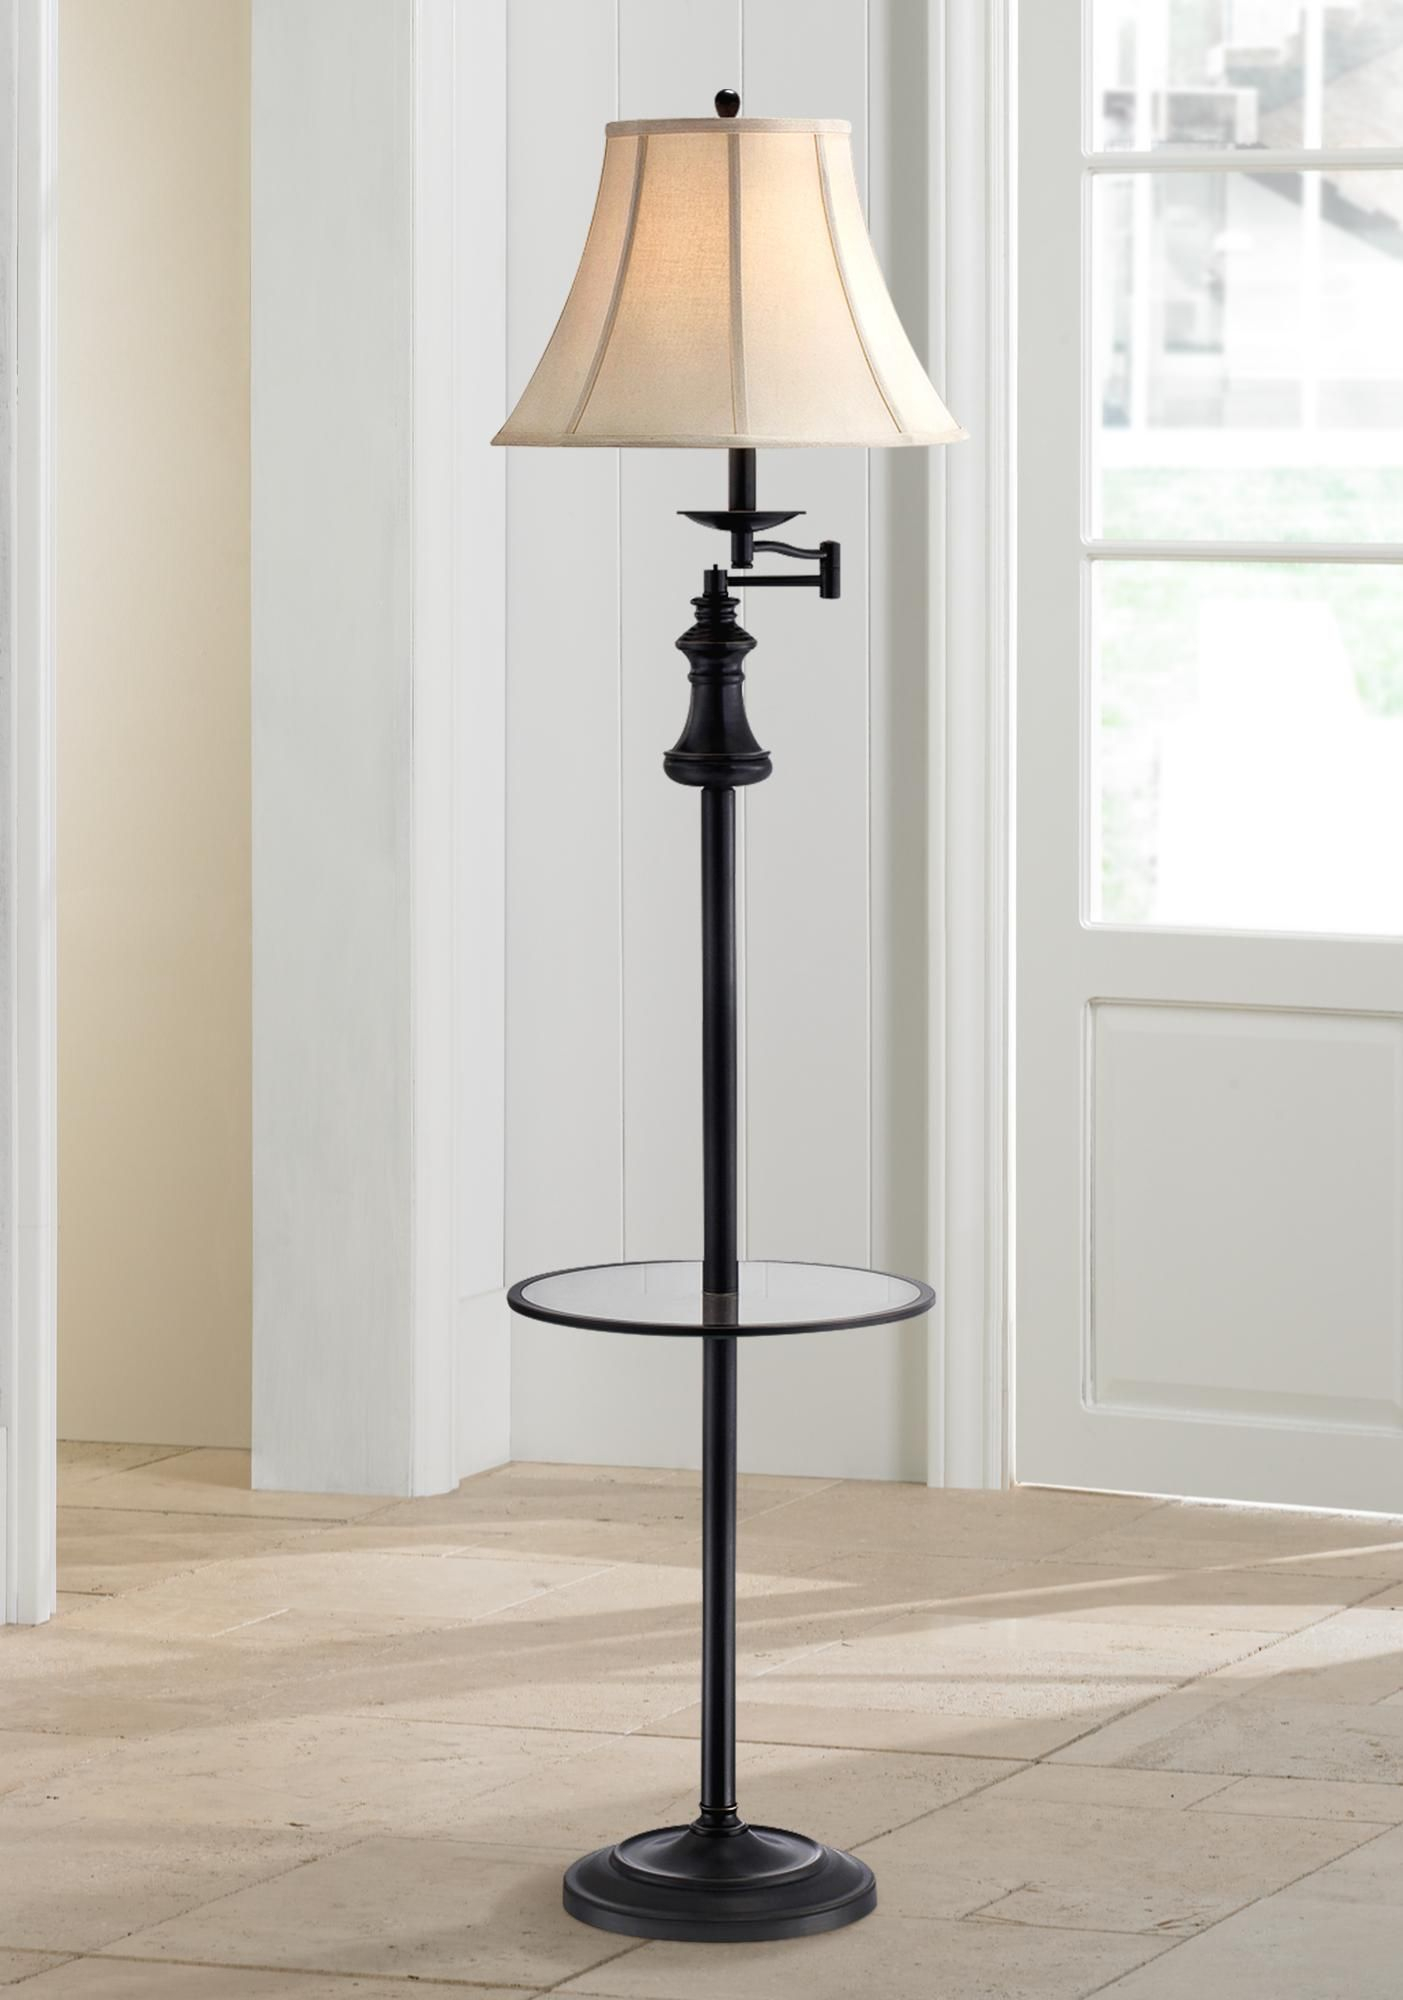 Lite Source Brandice Swing Arm Floor Lamp With Table Tray With Sizing 1403 X 2000 